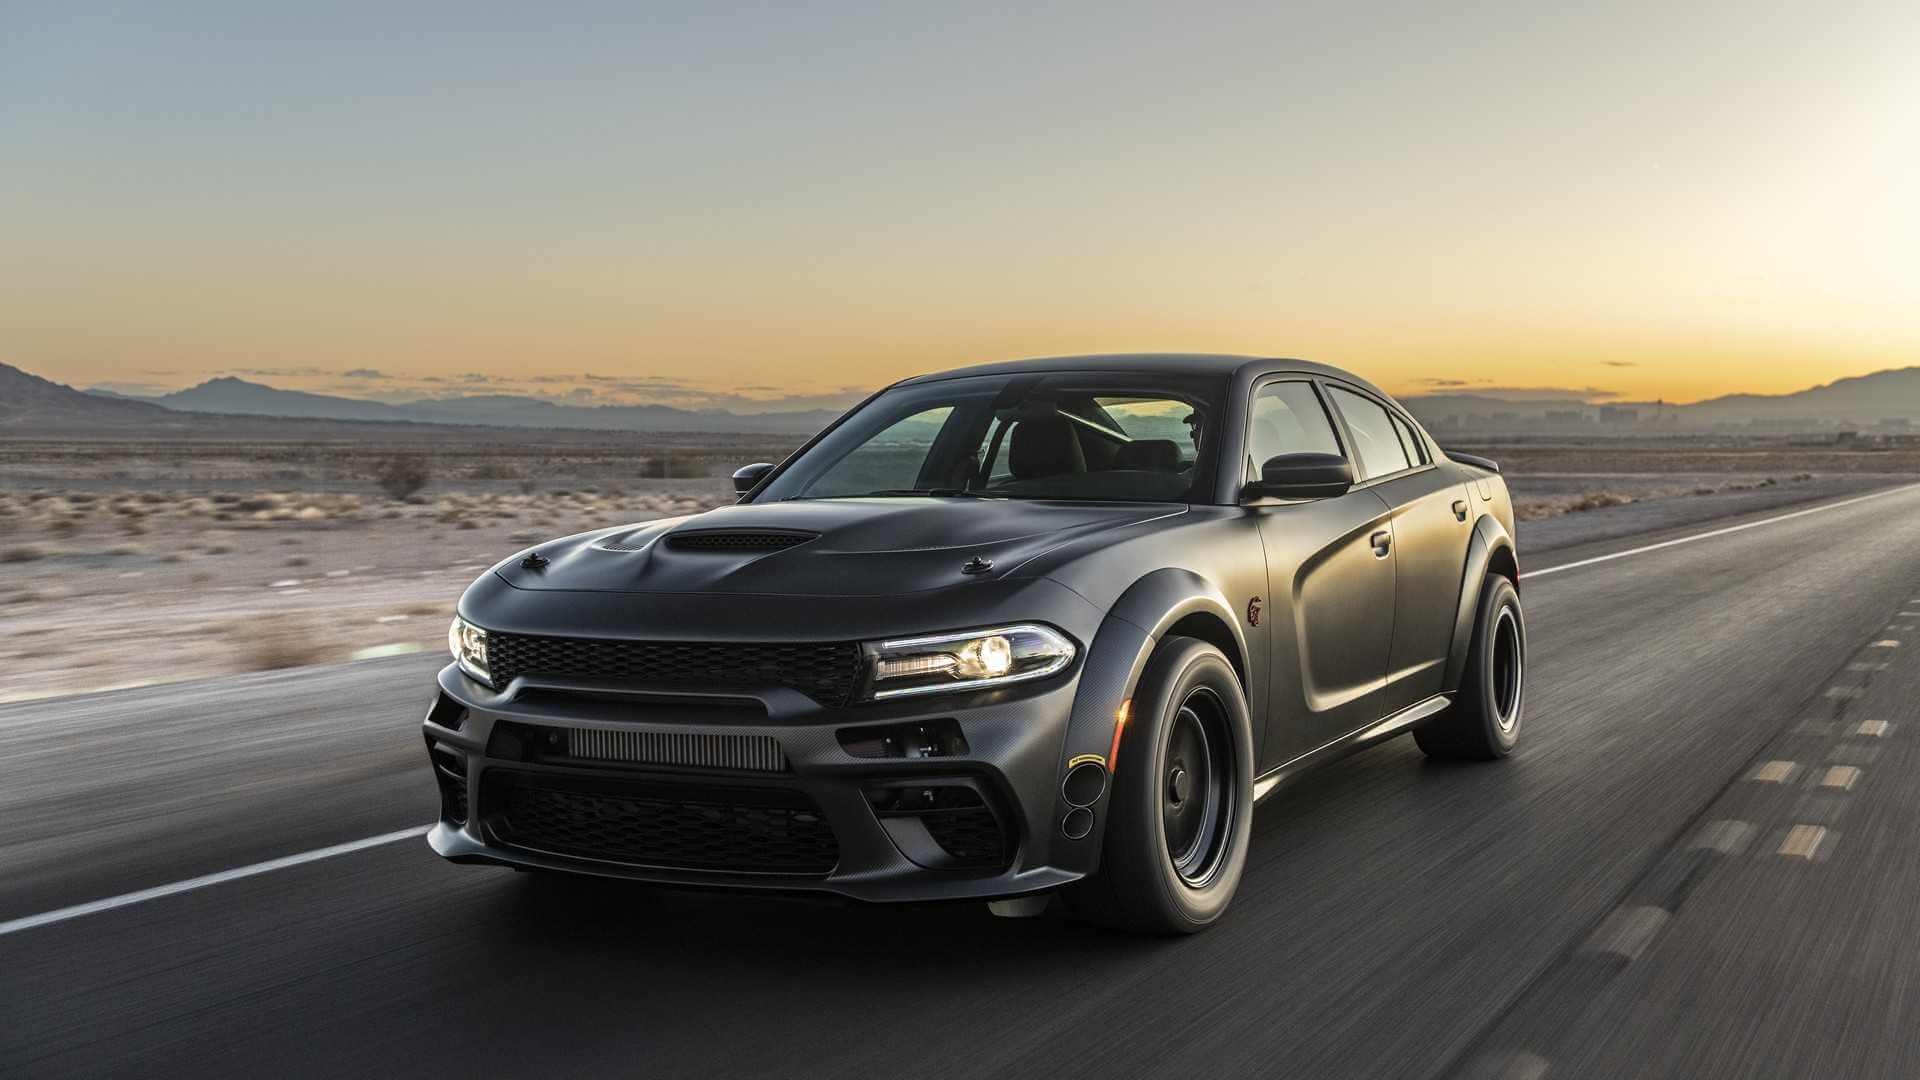 Dodge Charger SpeedKore: frontal.